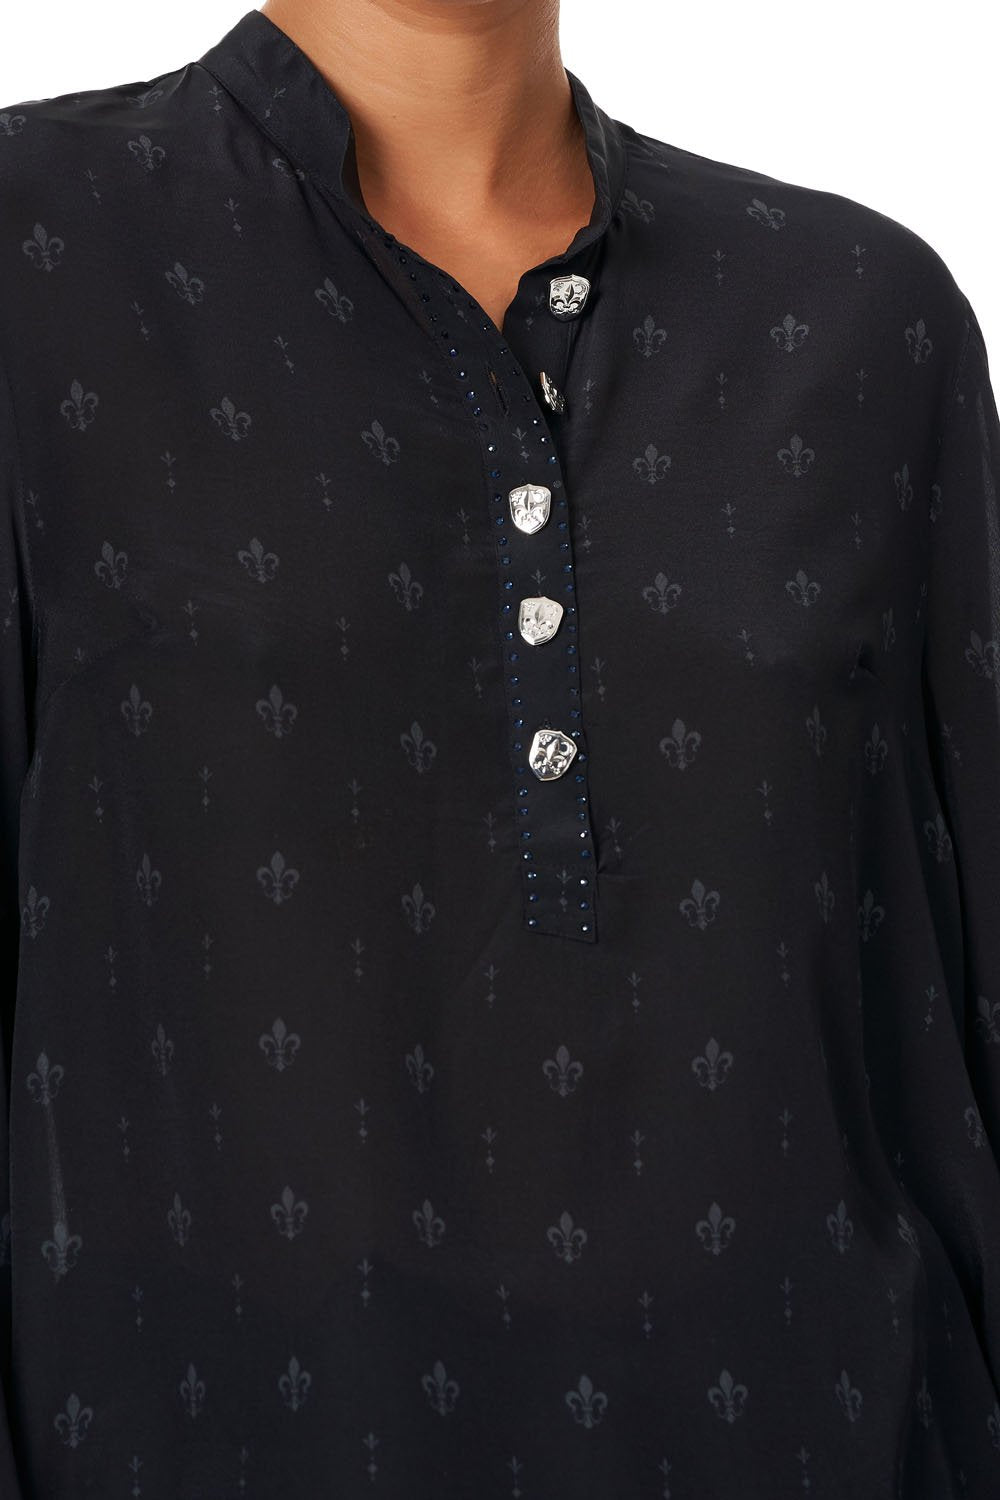 WIDE SLEEVE BUTTON UP BLOUSE BLACK